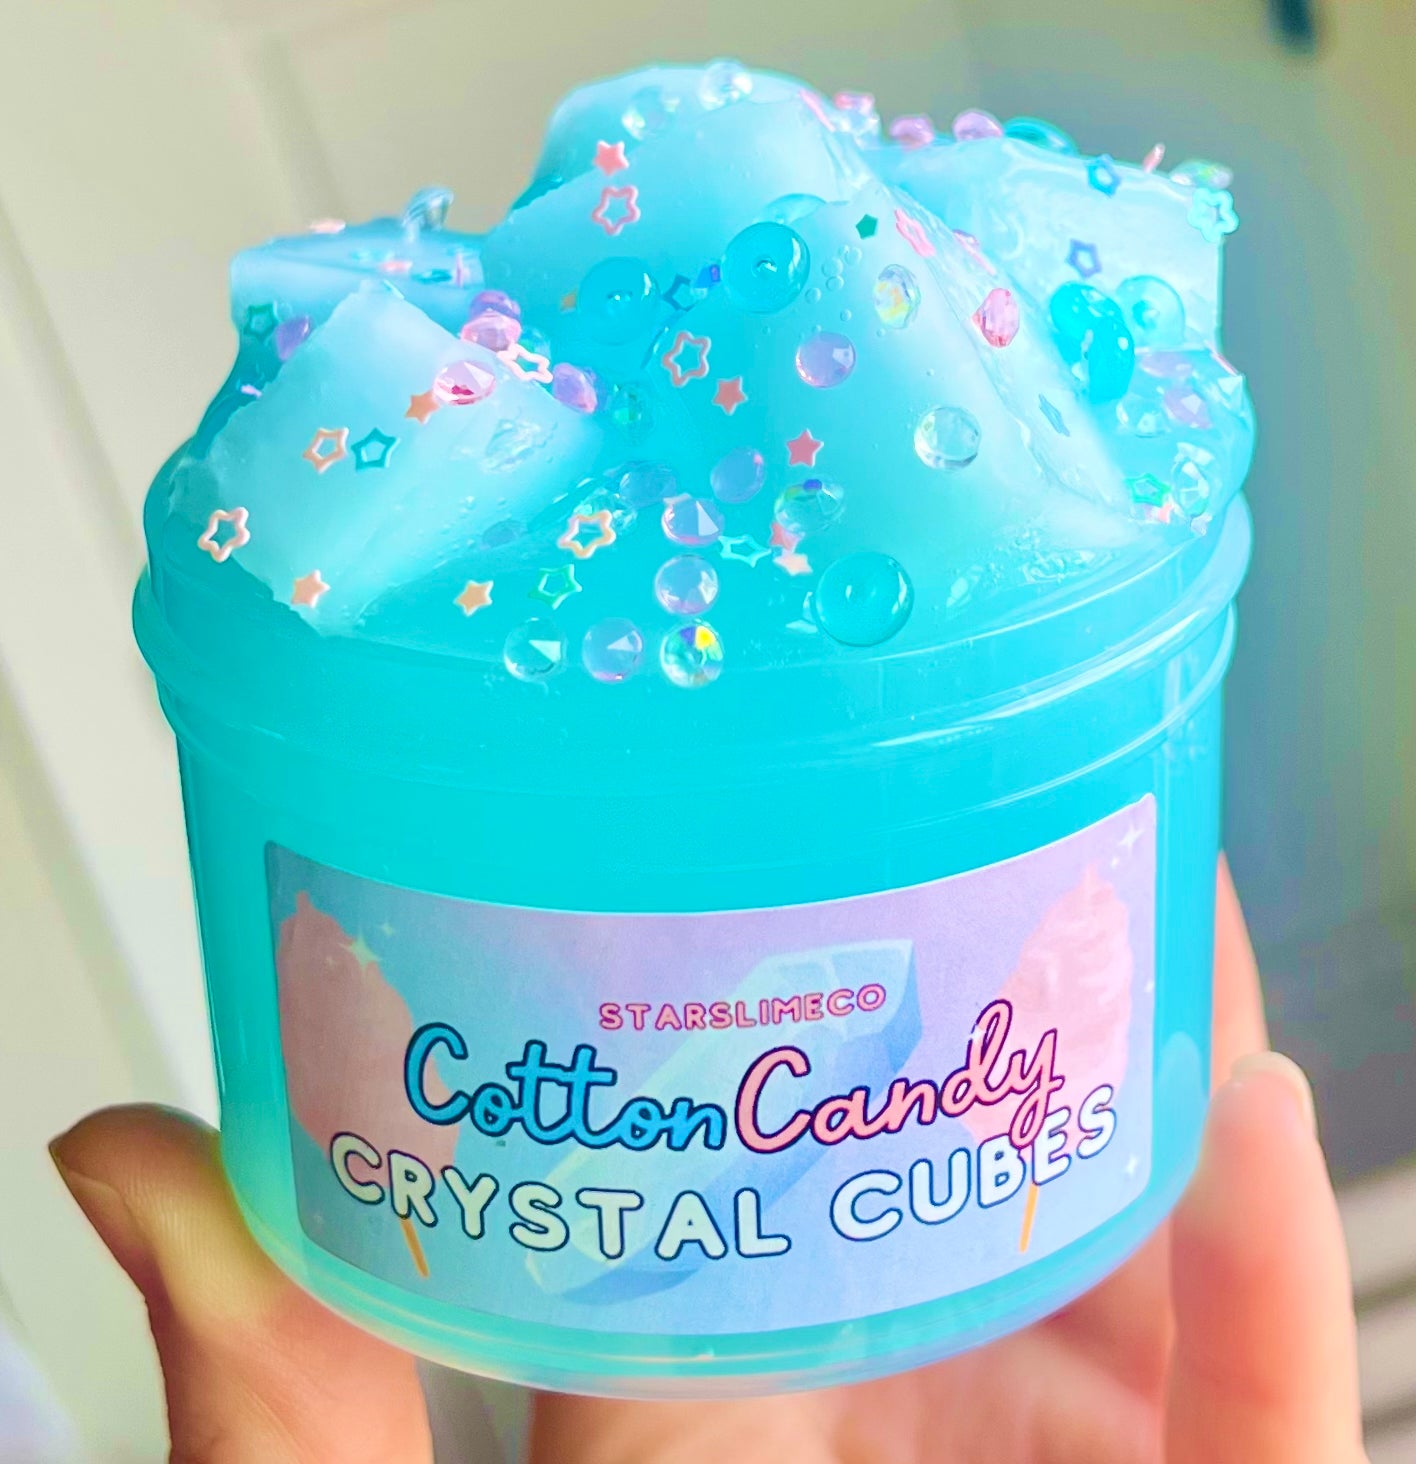 Cotton Candy Crystal Cubes